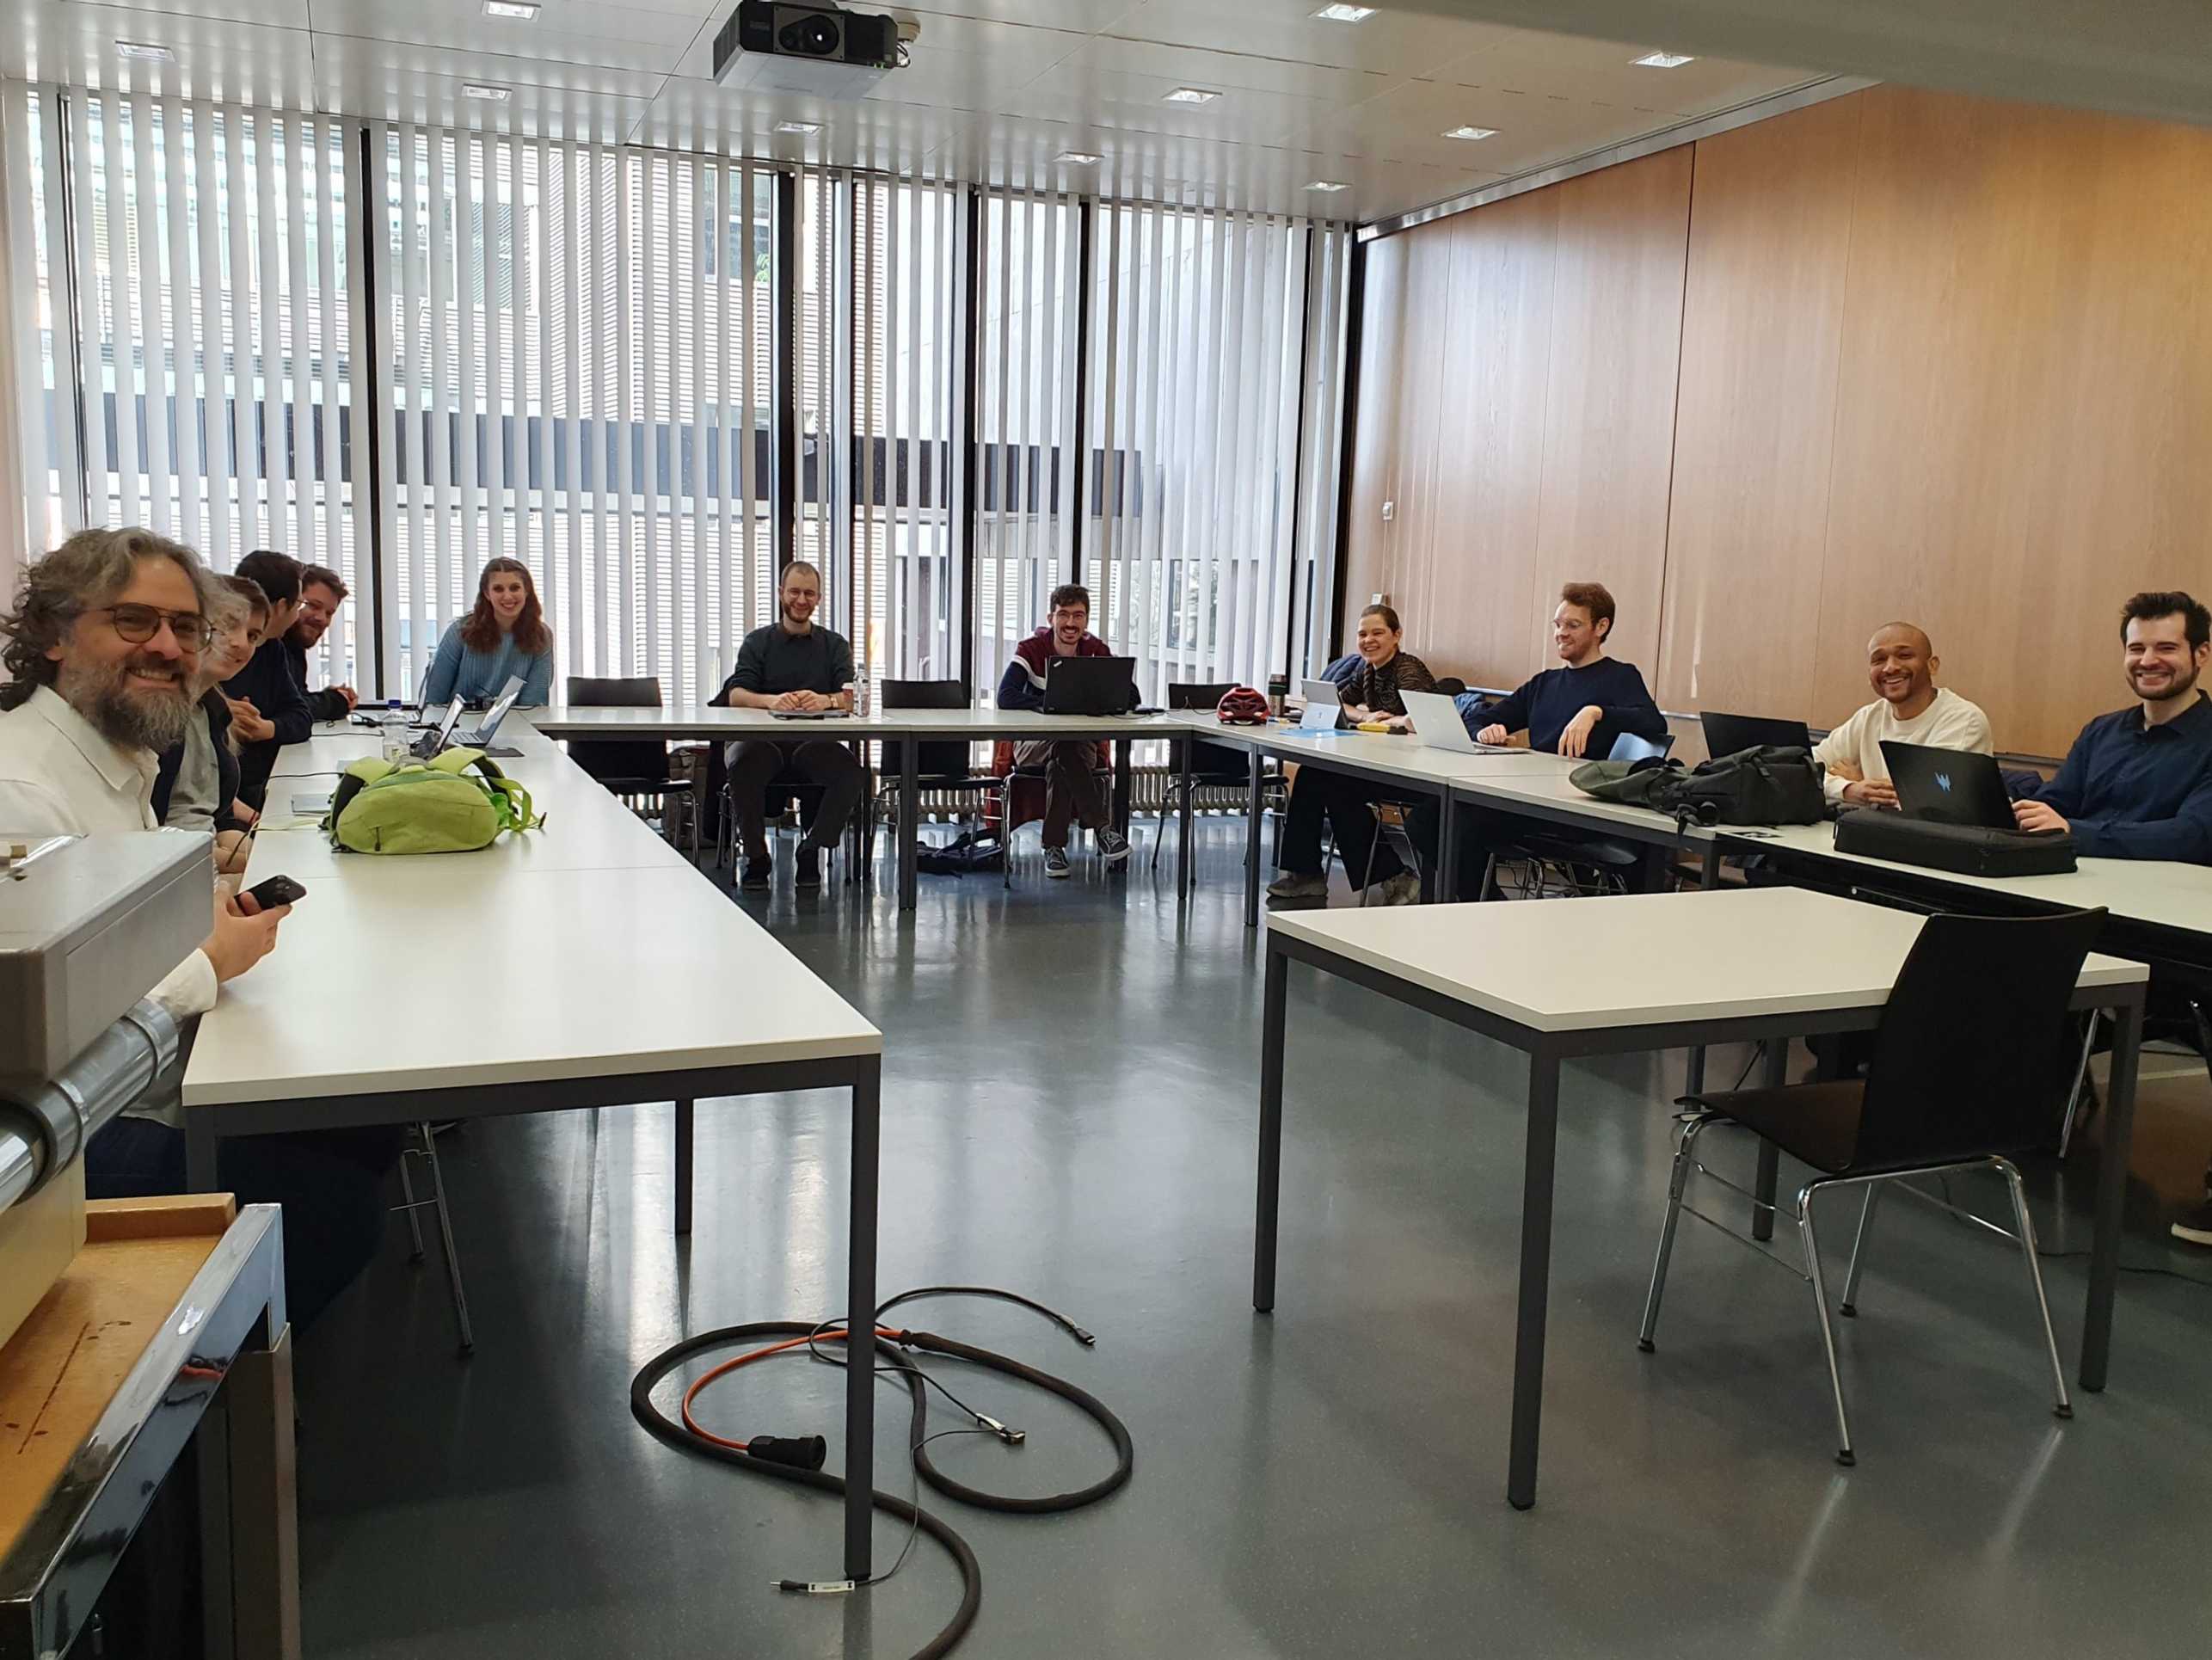 Prof. Volpe and his students during the evaluation day of the Machine Learning Course